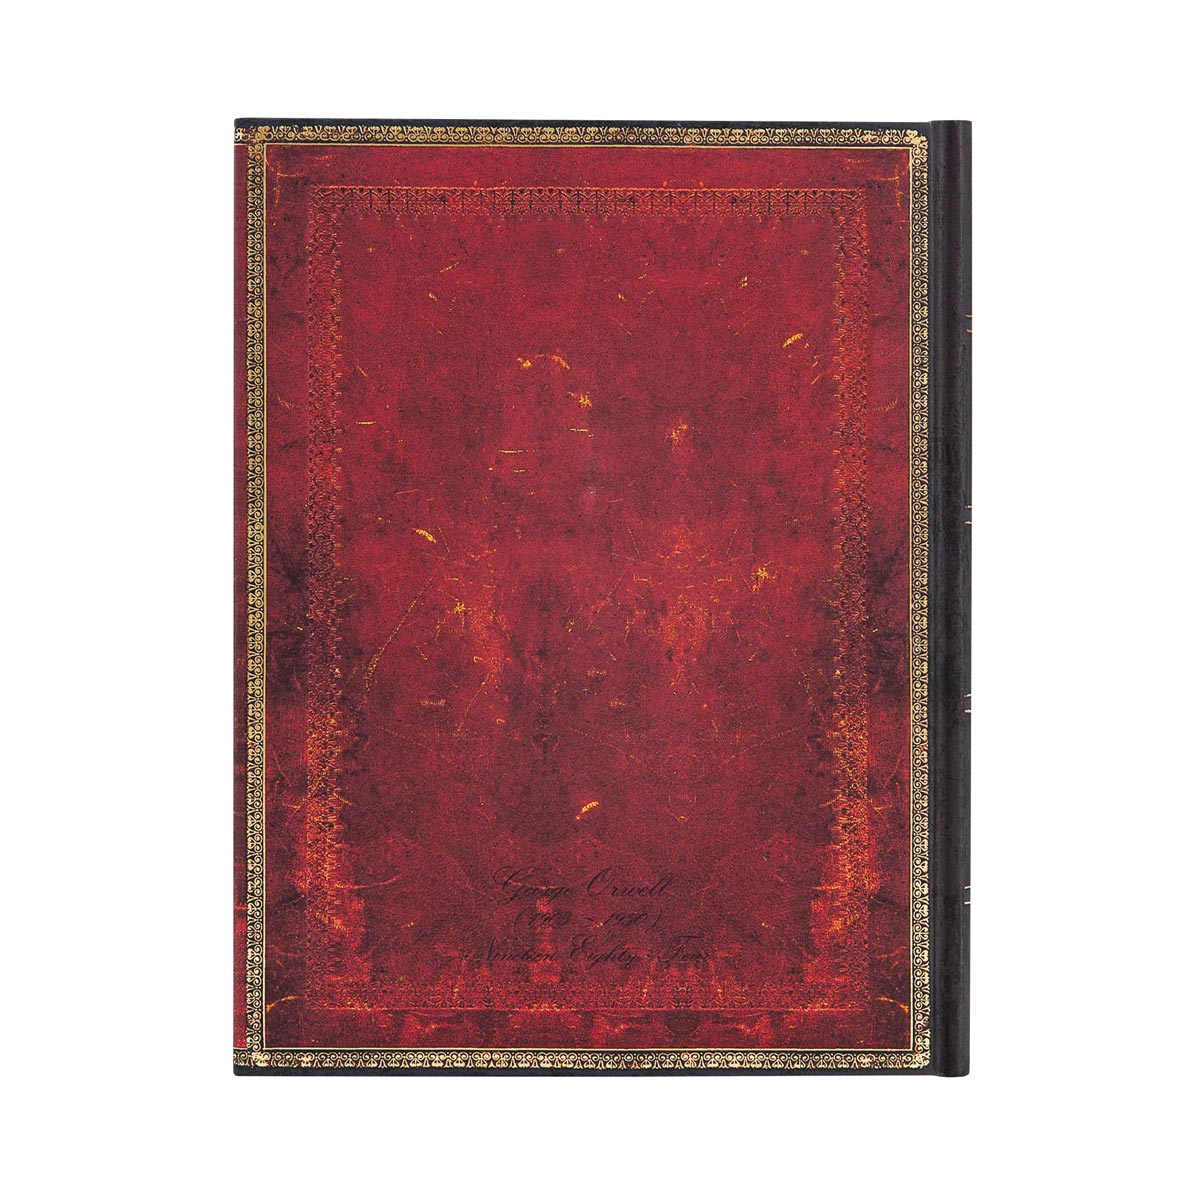 Paperblanks Orwell, 1984, Ultra 7 x 9 Inch Journal